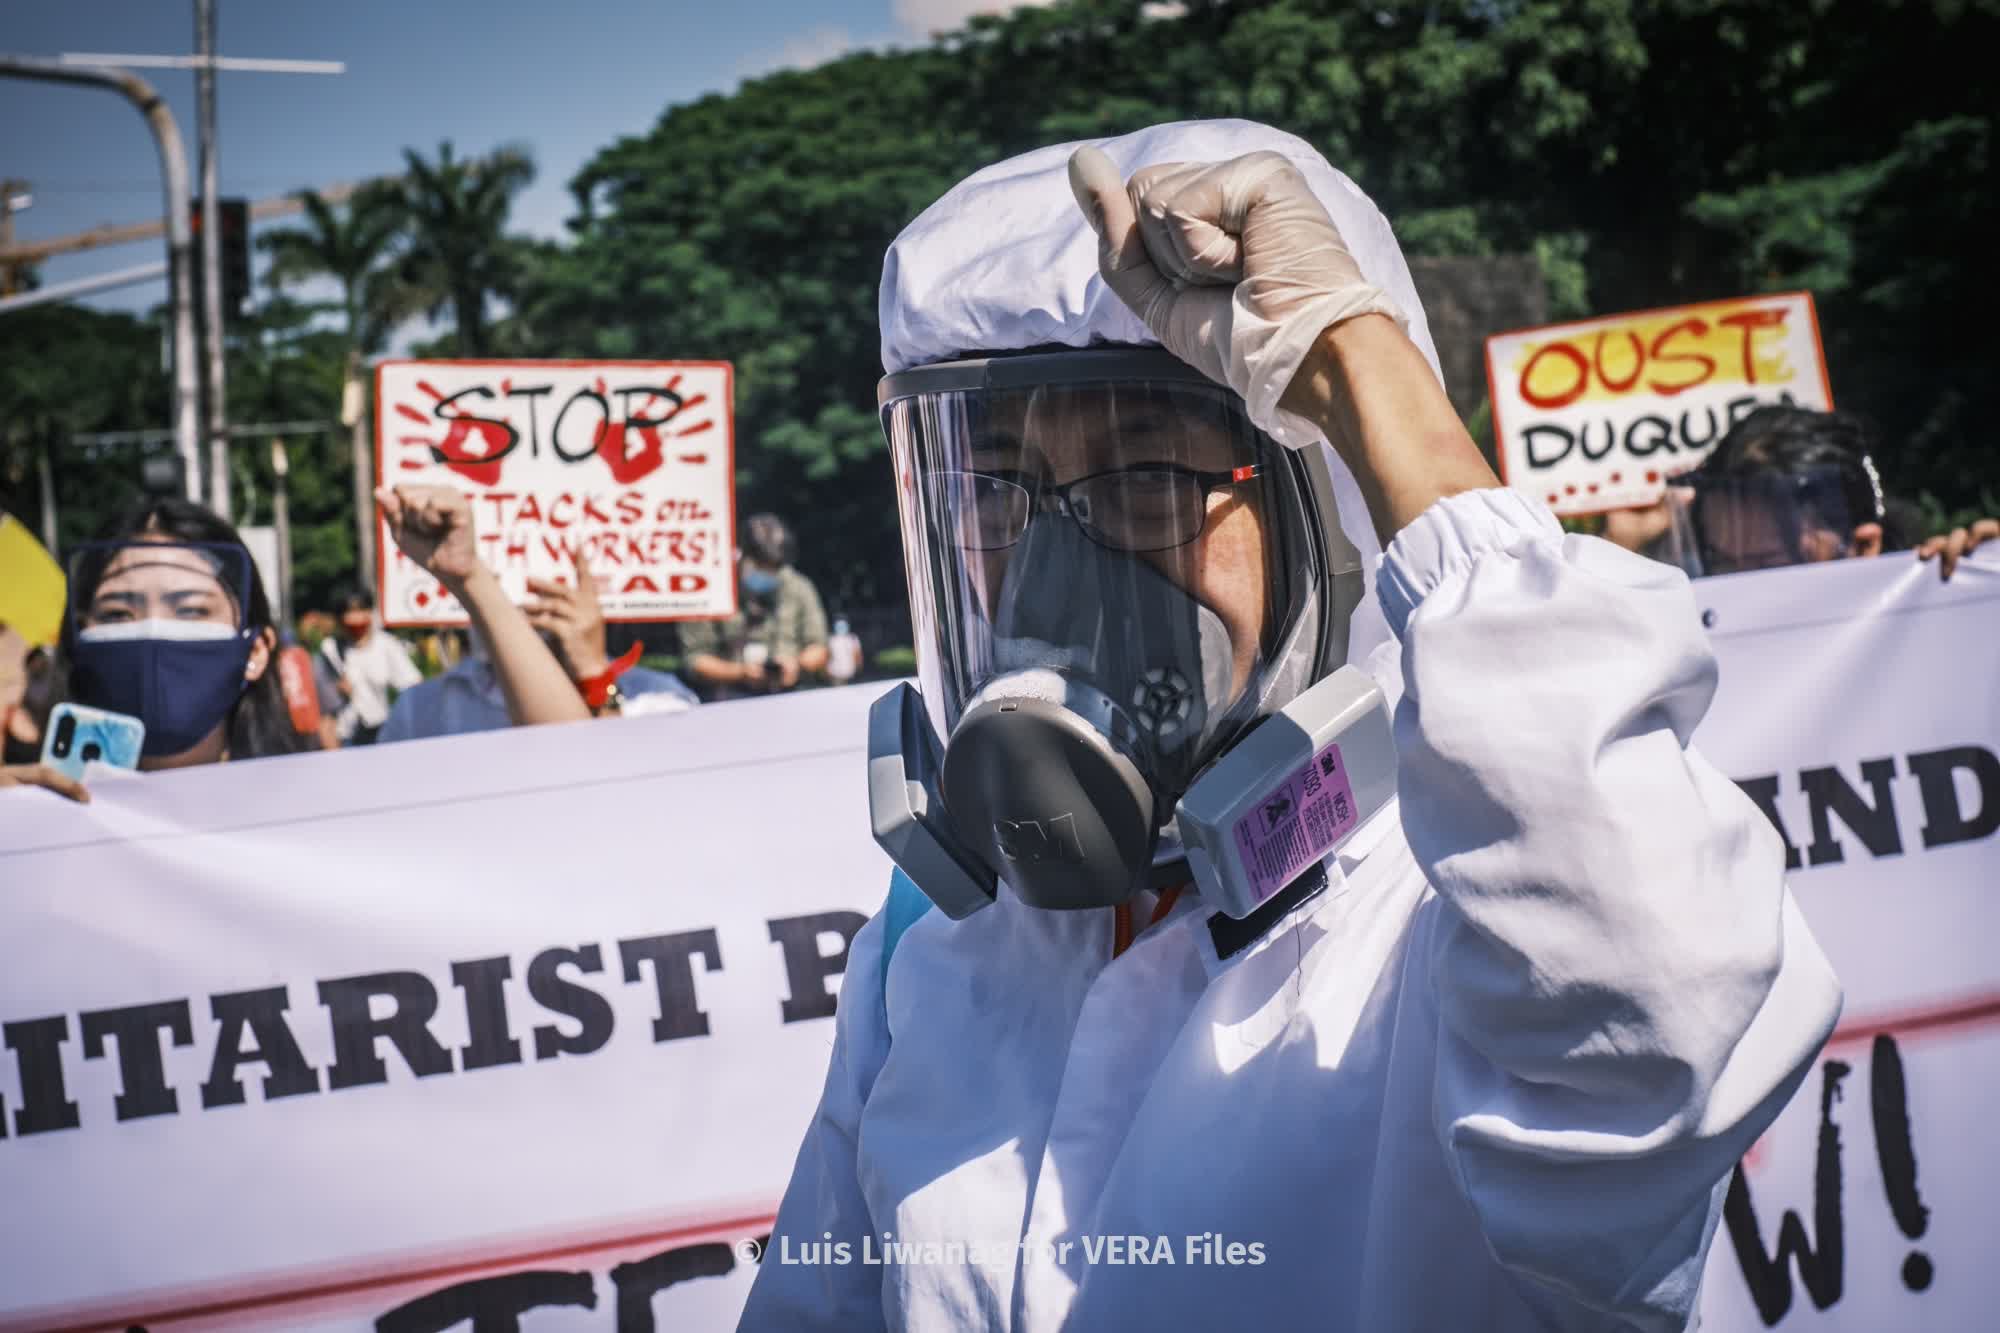 Despite ban, voices of dissent ring loud and clear SONA 2020 23/19  Photos by Luis Liwanag